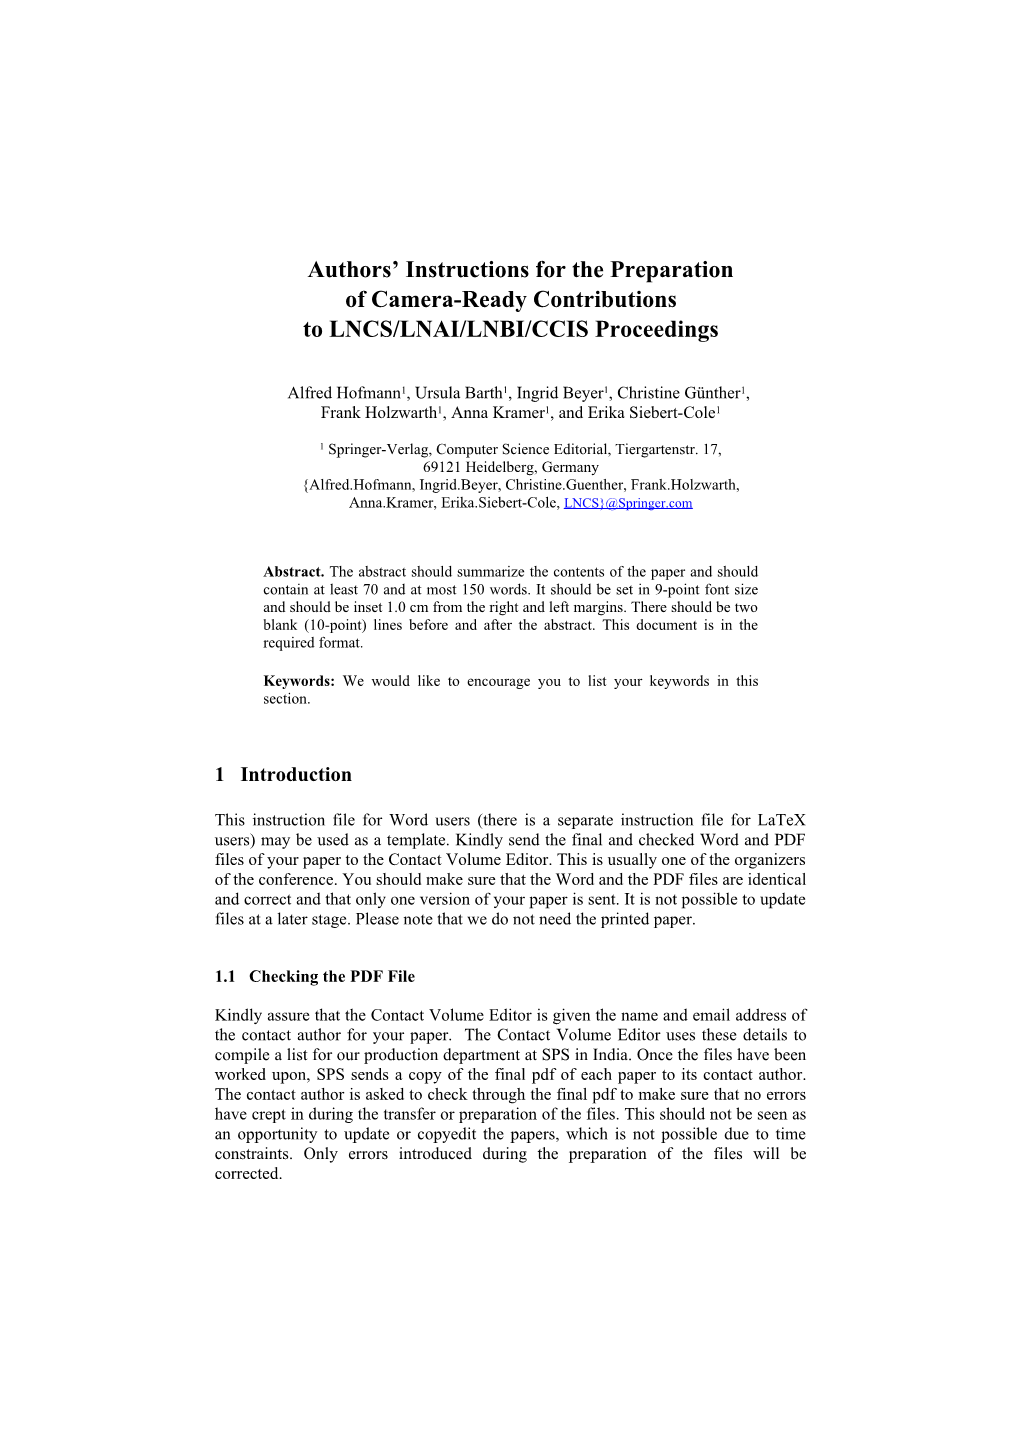 Authors Instructions for the Preparation of Camera-Ready Contributions to LNCS/LNAI/LNBI/CCIS